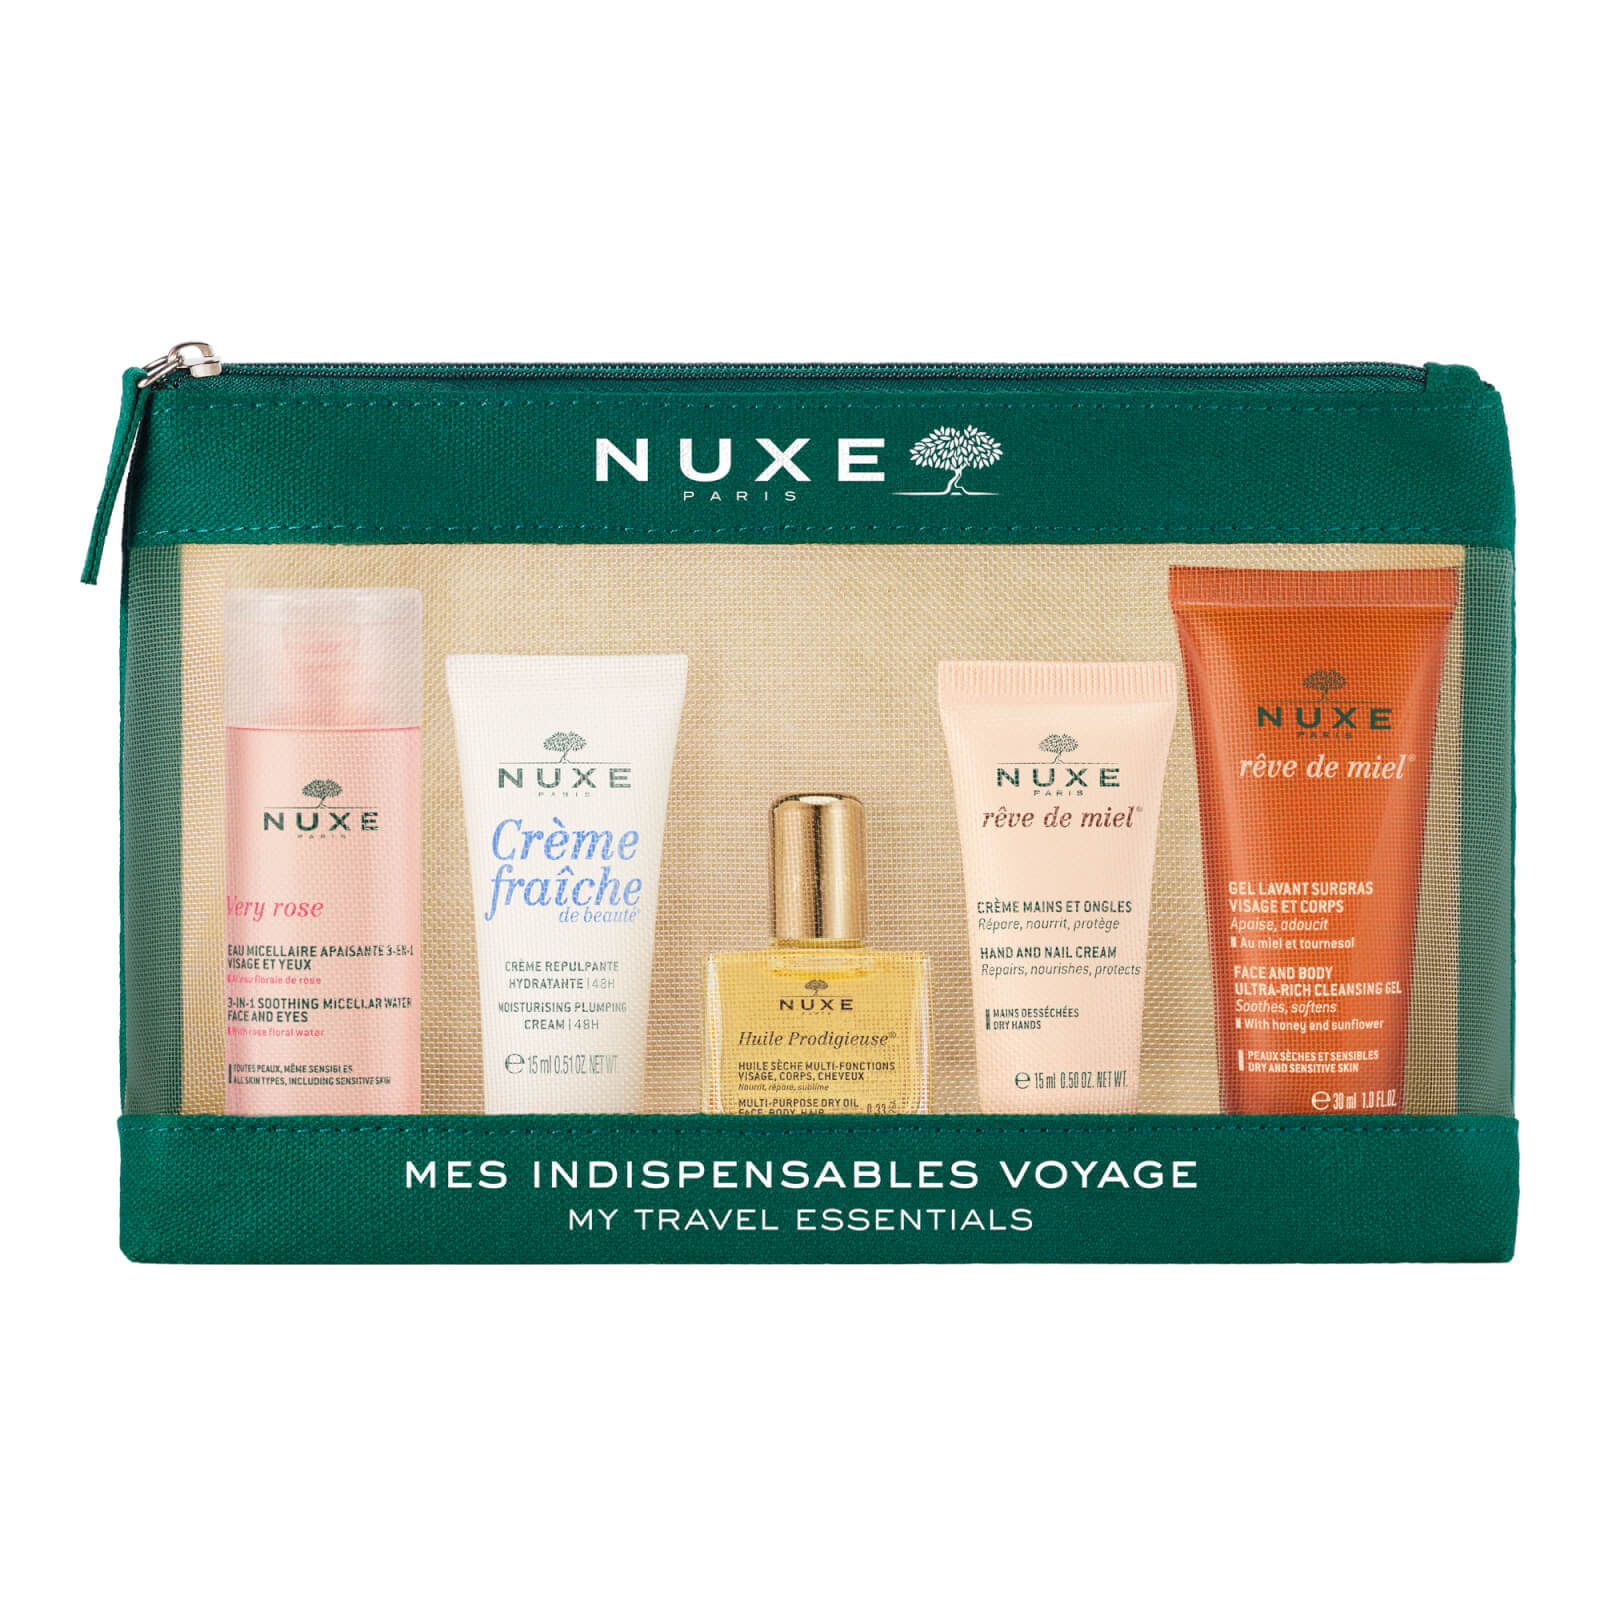 NUXE Travel Essentials Kit